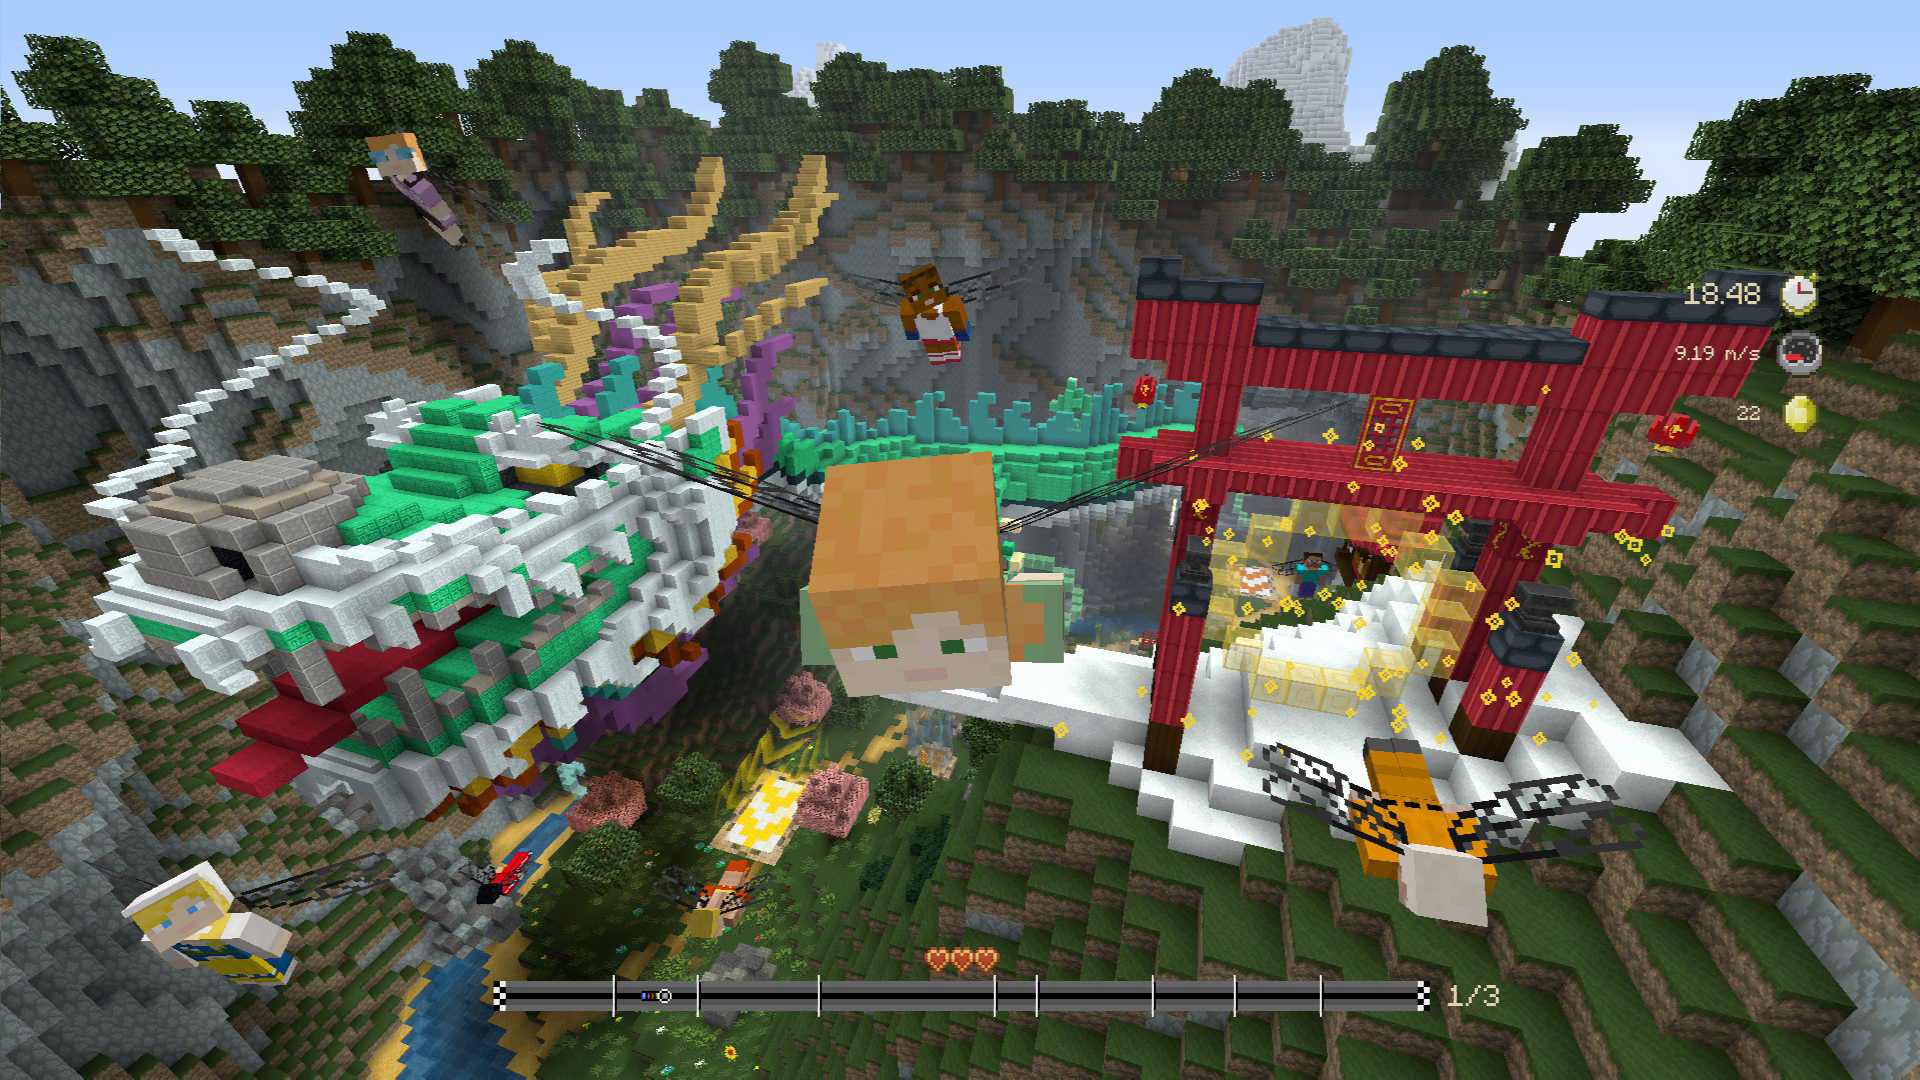 Minecraft Update 1.55 for PS3 released, Full Patch Note